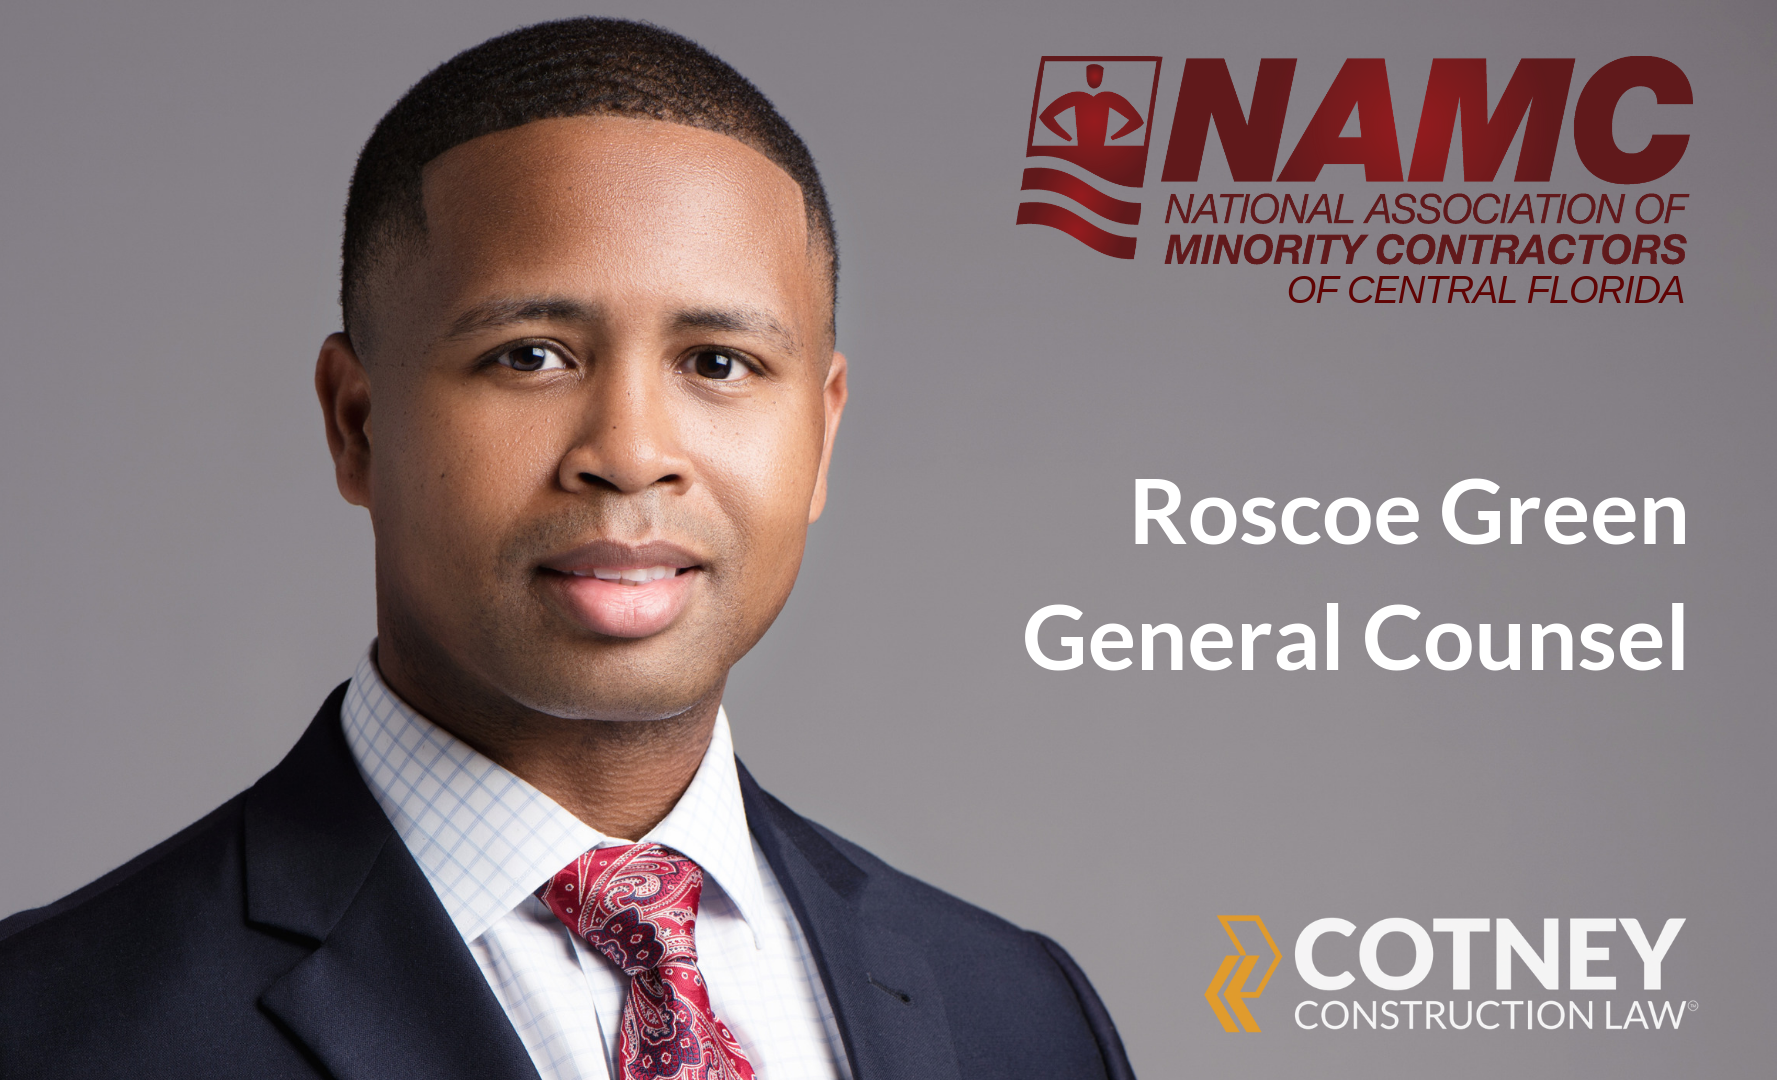 OCT - IndNews - Cotney - Roscoe Green Named General Counsel to NAMC Central Florida